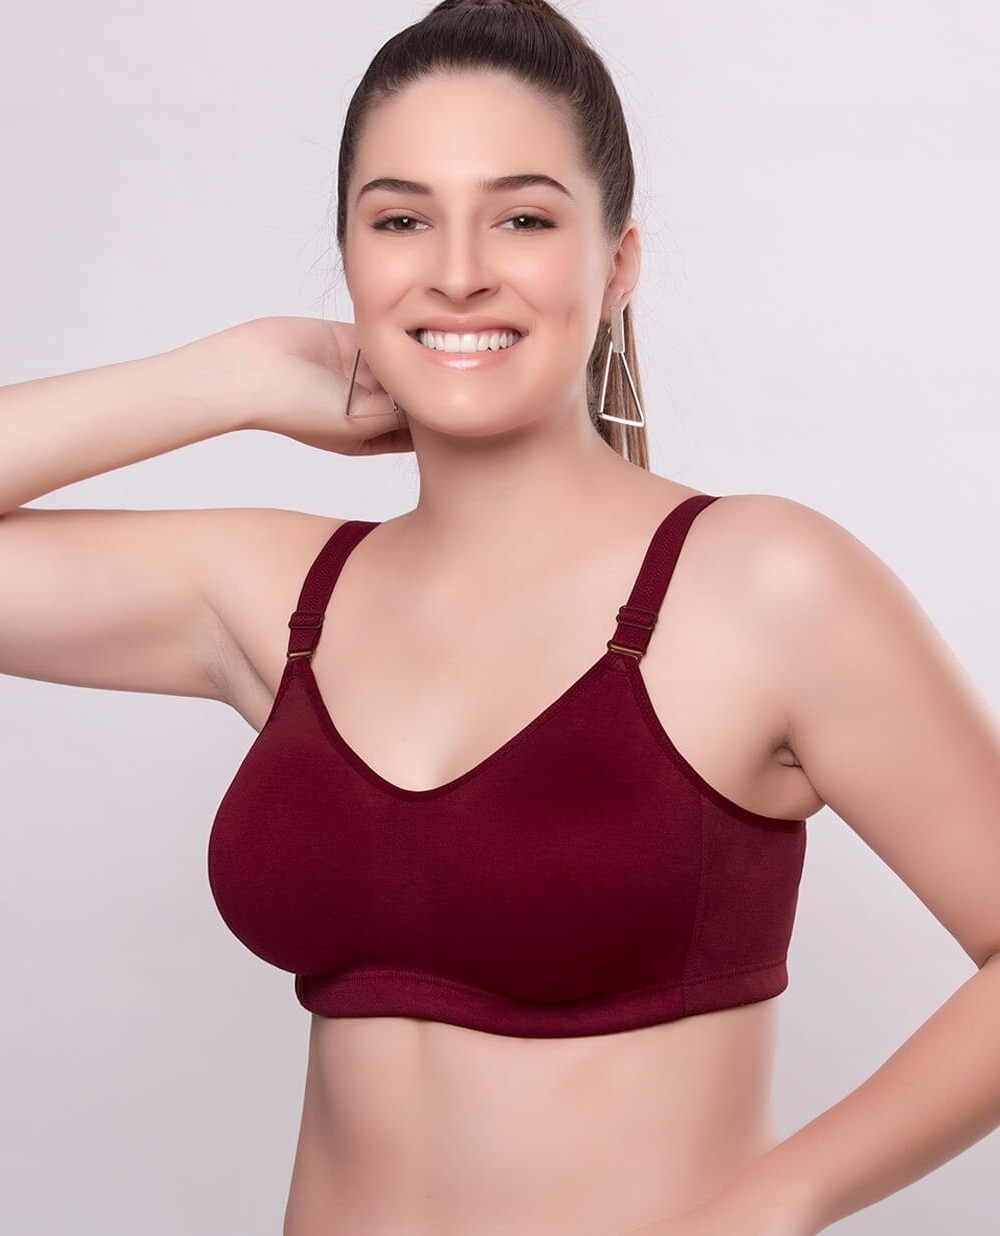 RIZA BY TRYLO on Instagram: True beauty shines when you feel comfortable  in your own skin. The Riza Comfortfit Bra is your secret weapon for  authentic confidence, all day long. 100% cotton